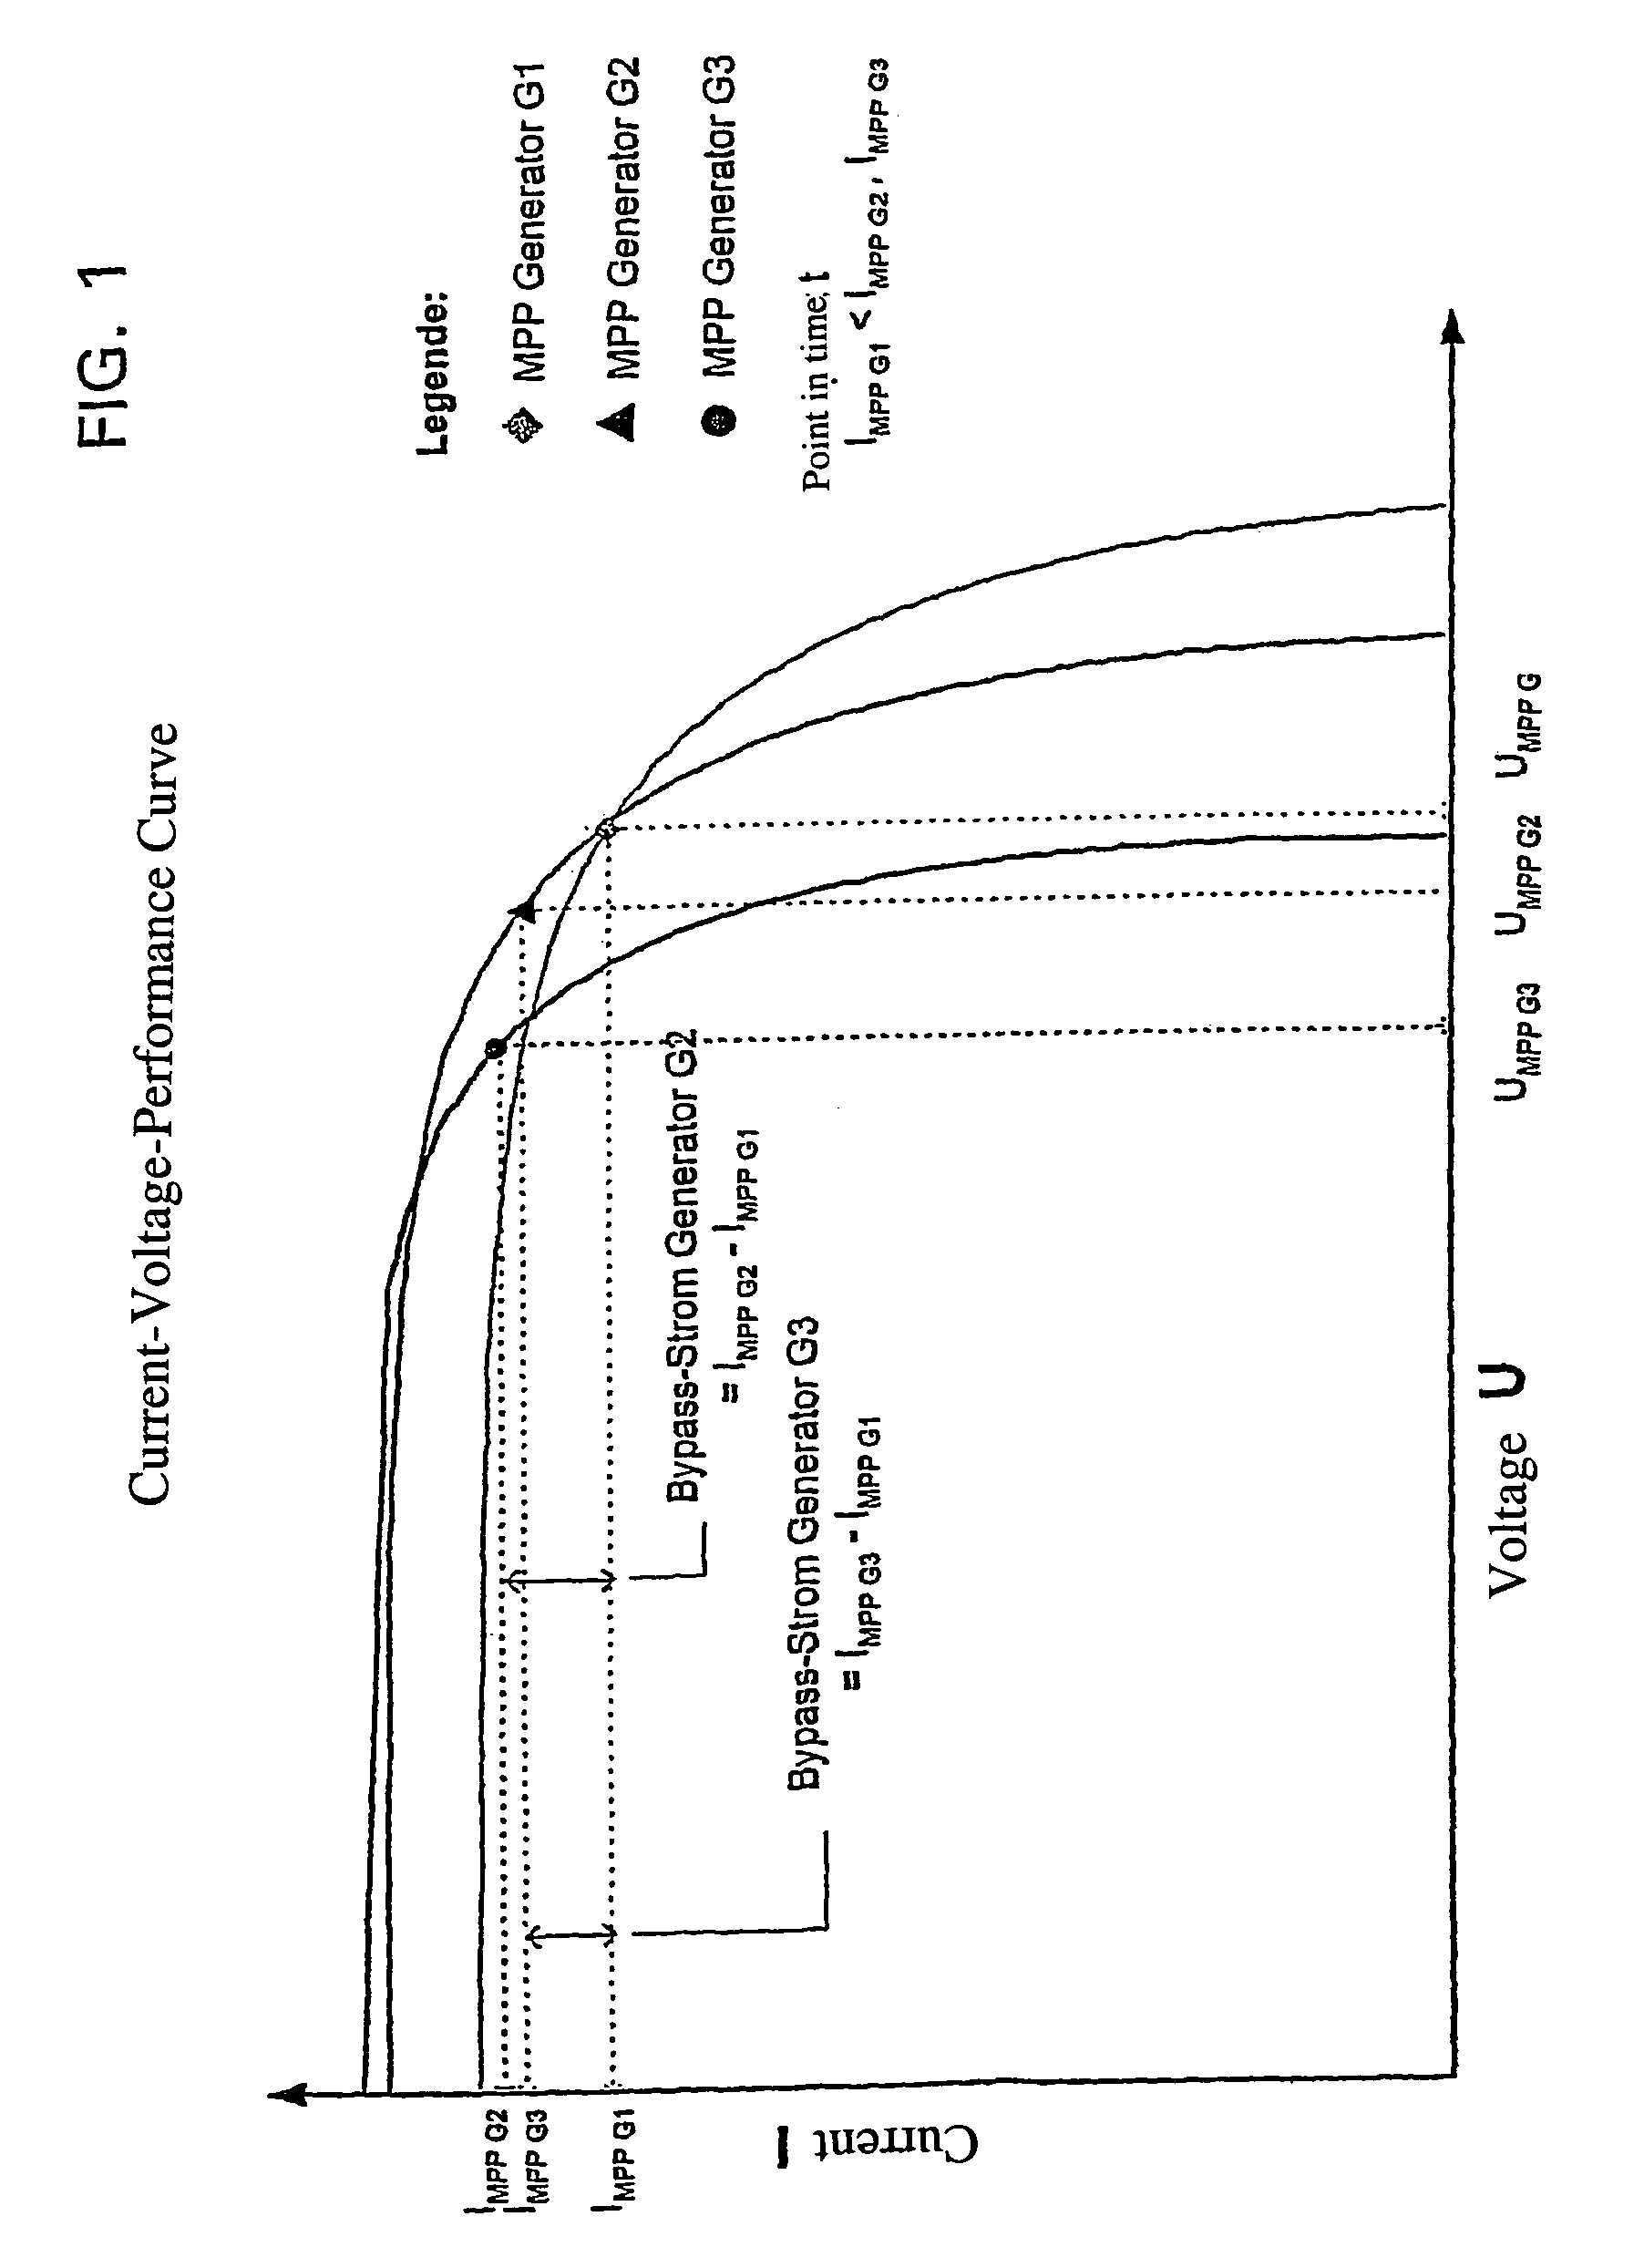 Circuit arrangement for a photovoltaic system